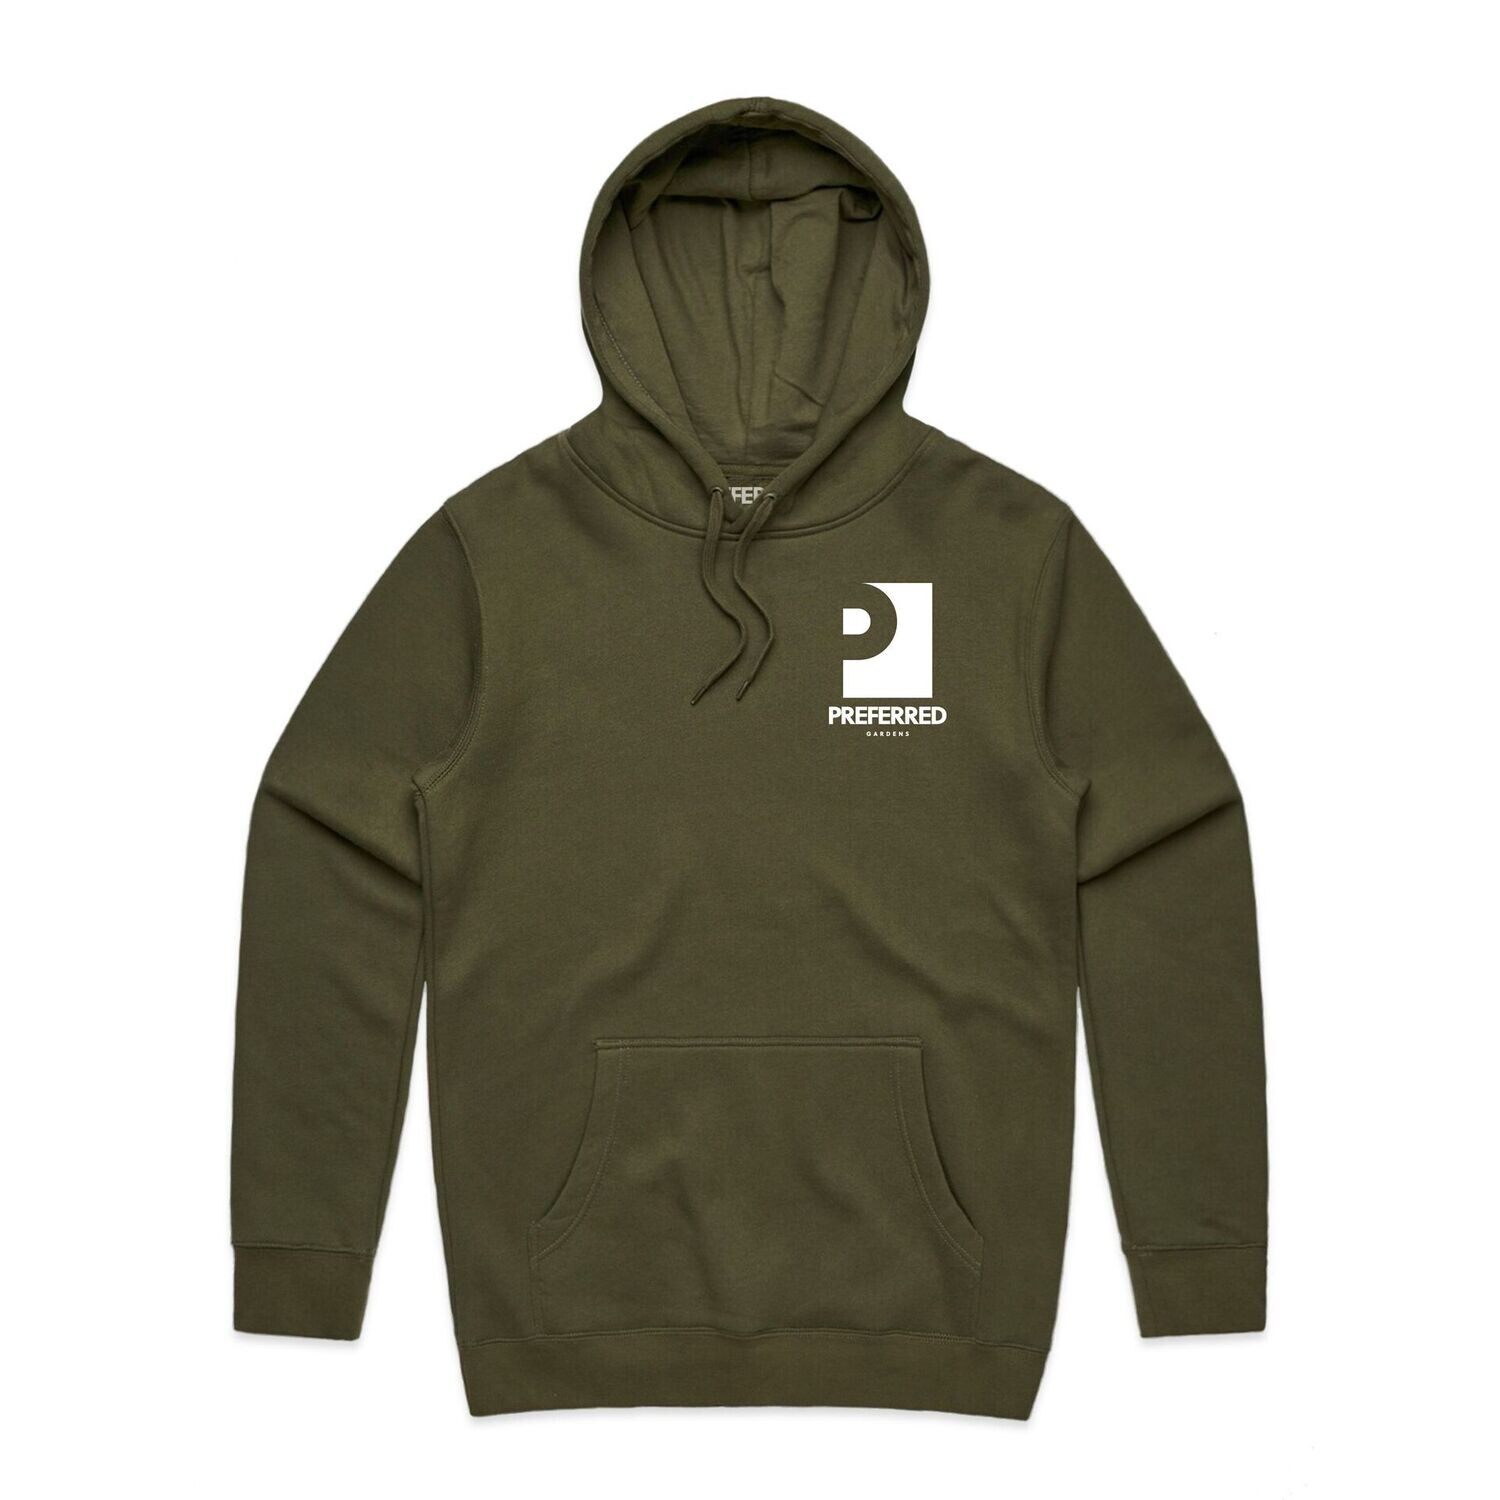 Military Green Preferred Hoodie, Color: Military Green, Size: S